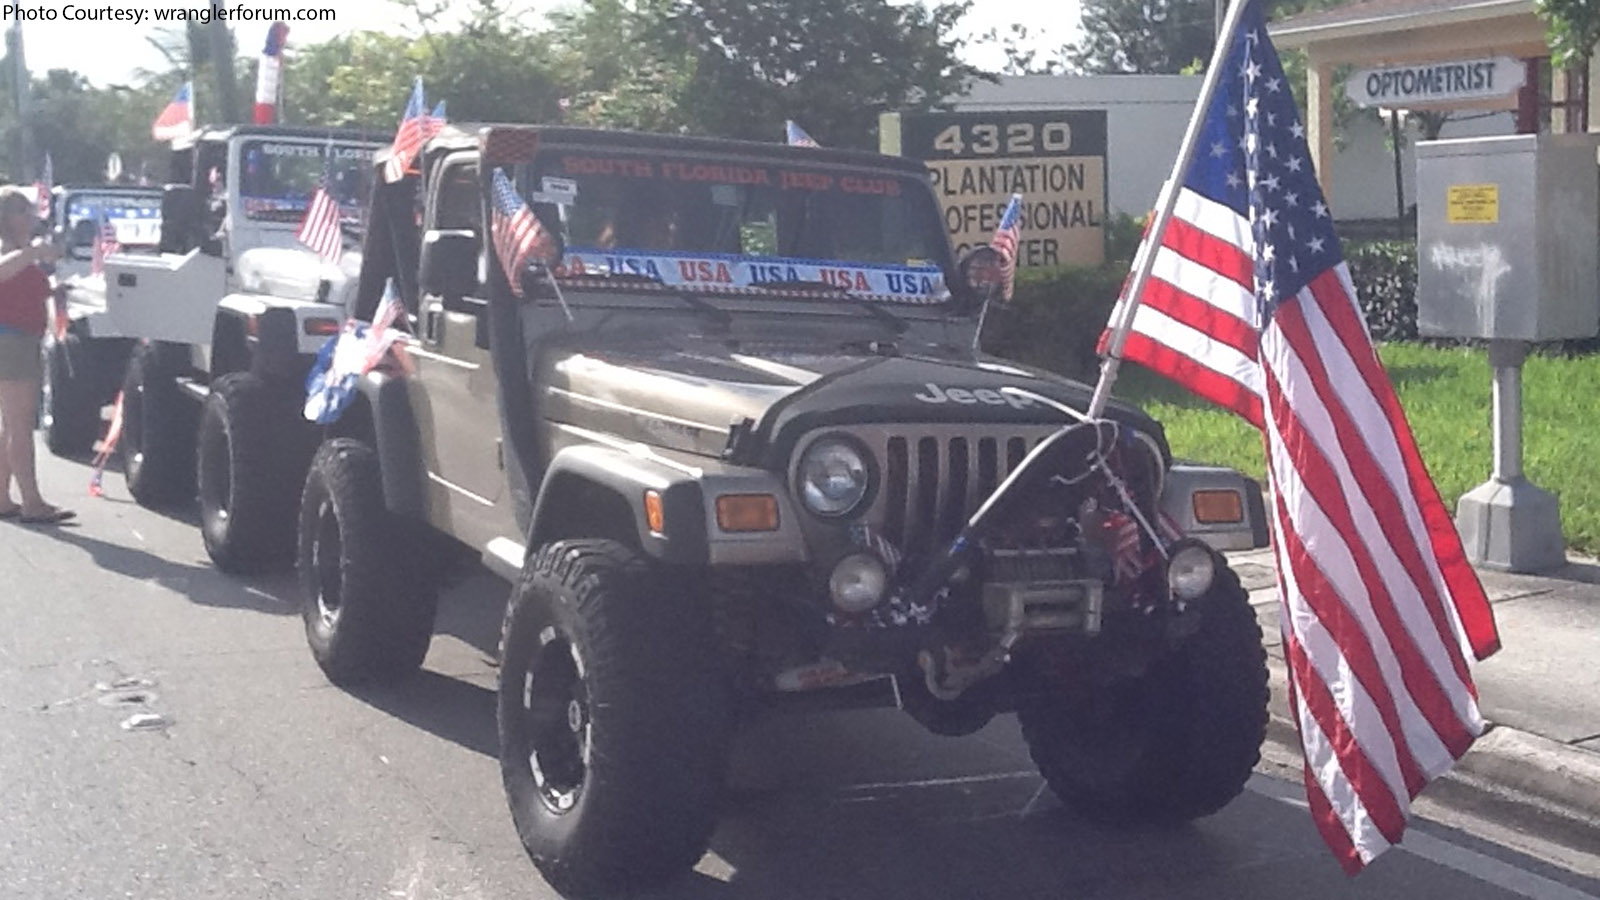 How To Celebrate 4th of July with Your Jeep | Jk-forum